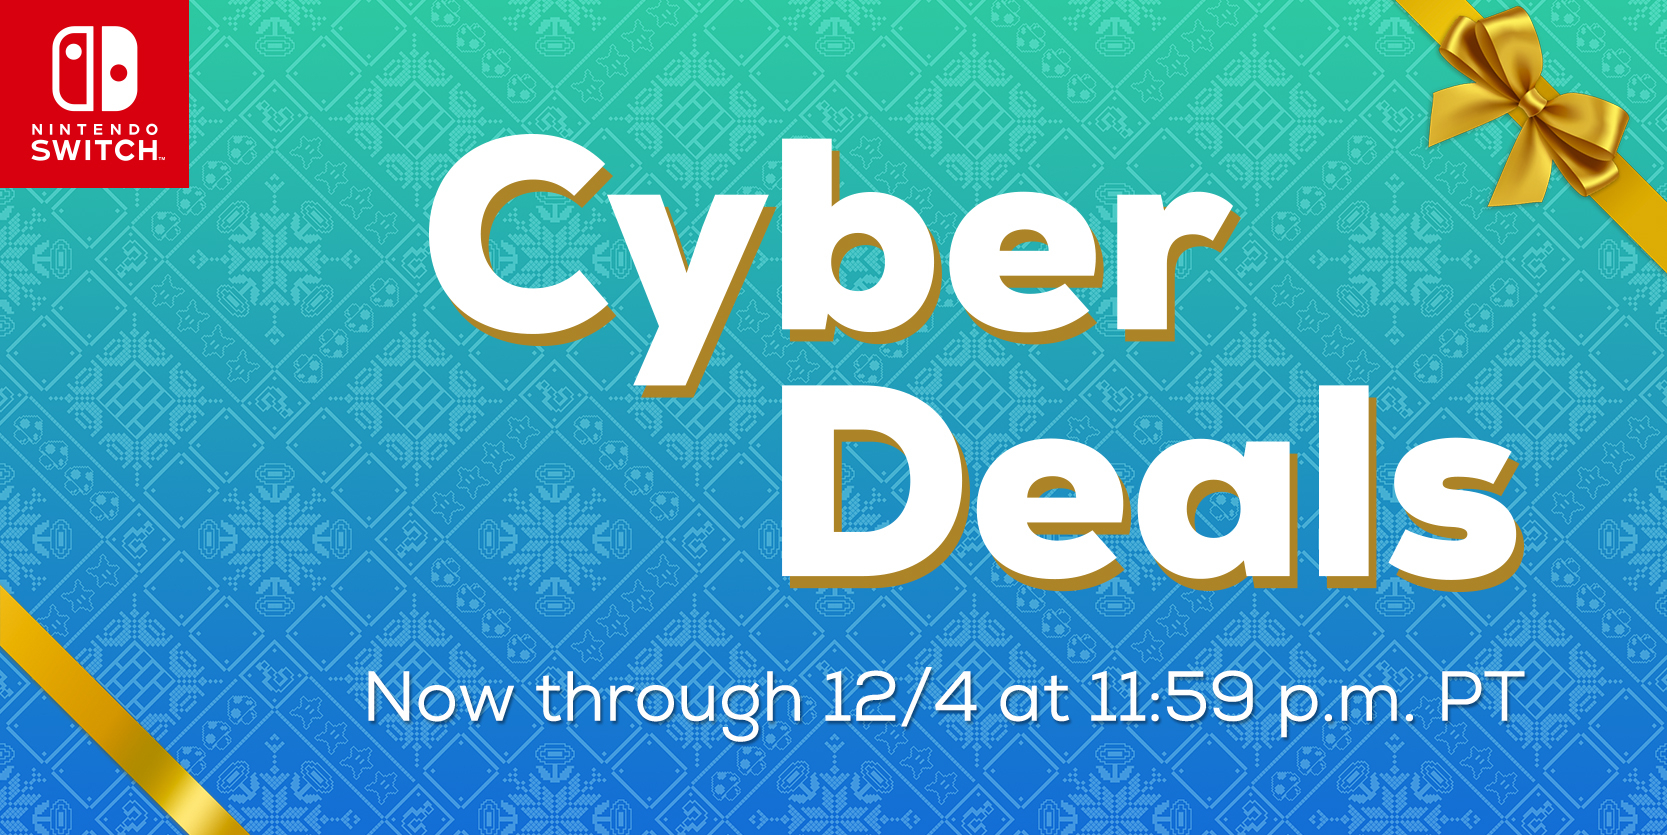 The Nintendo Cyber Deals game sale is on now! - News